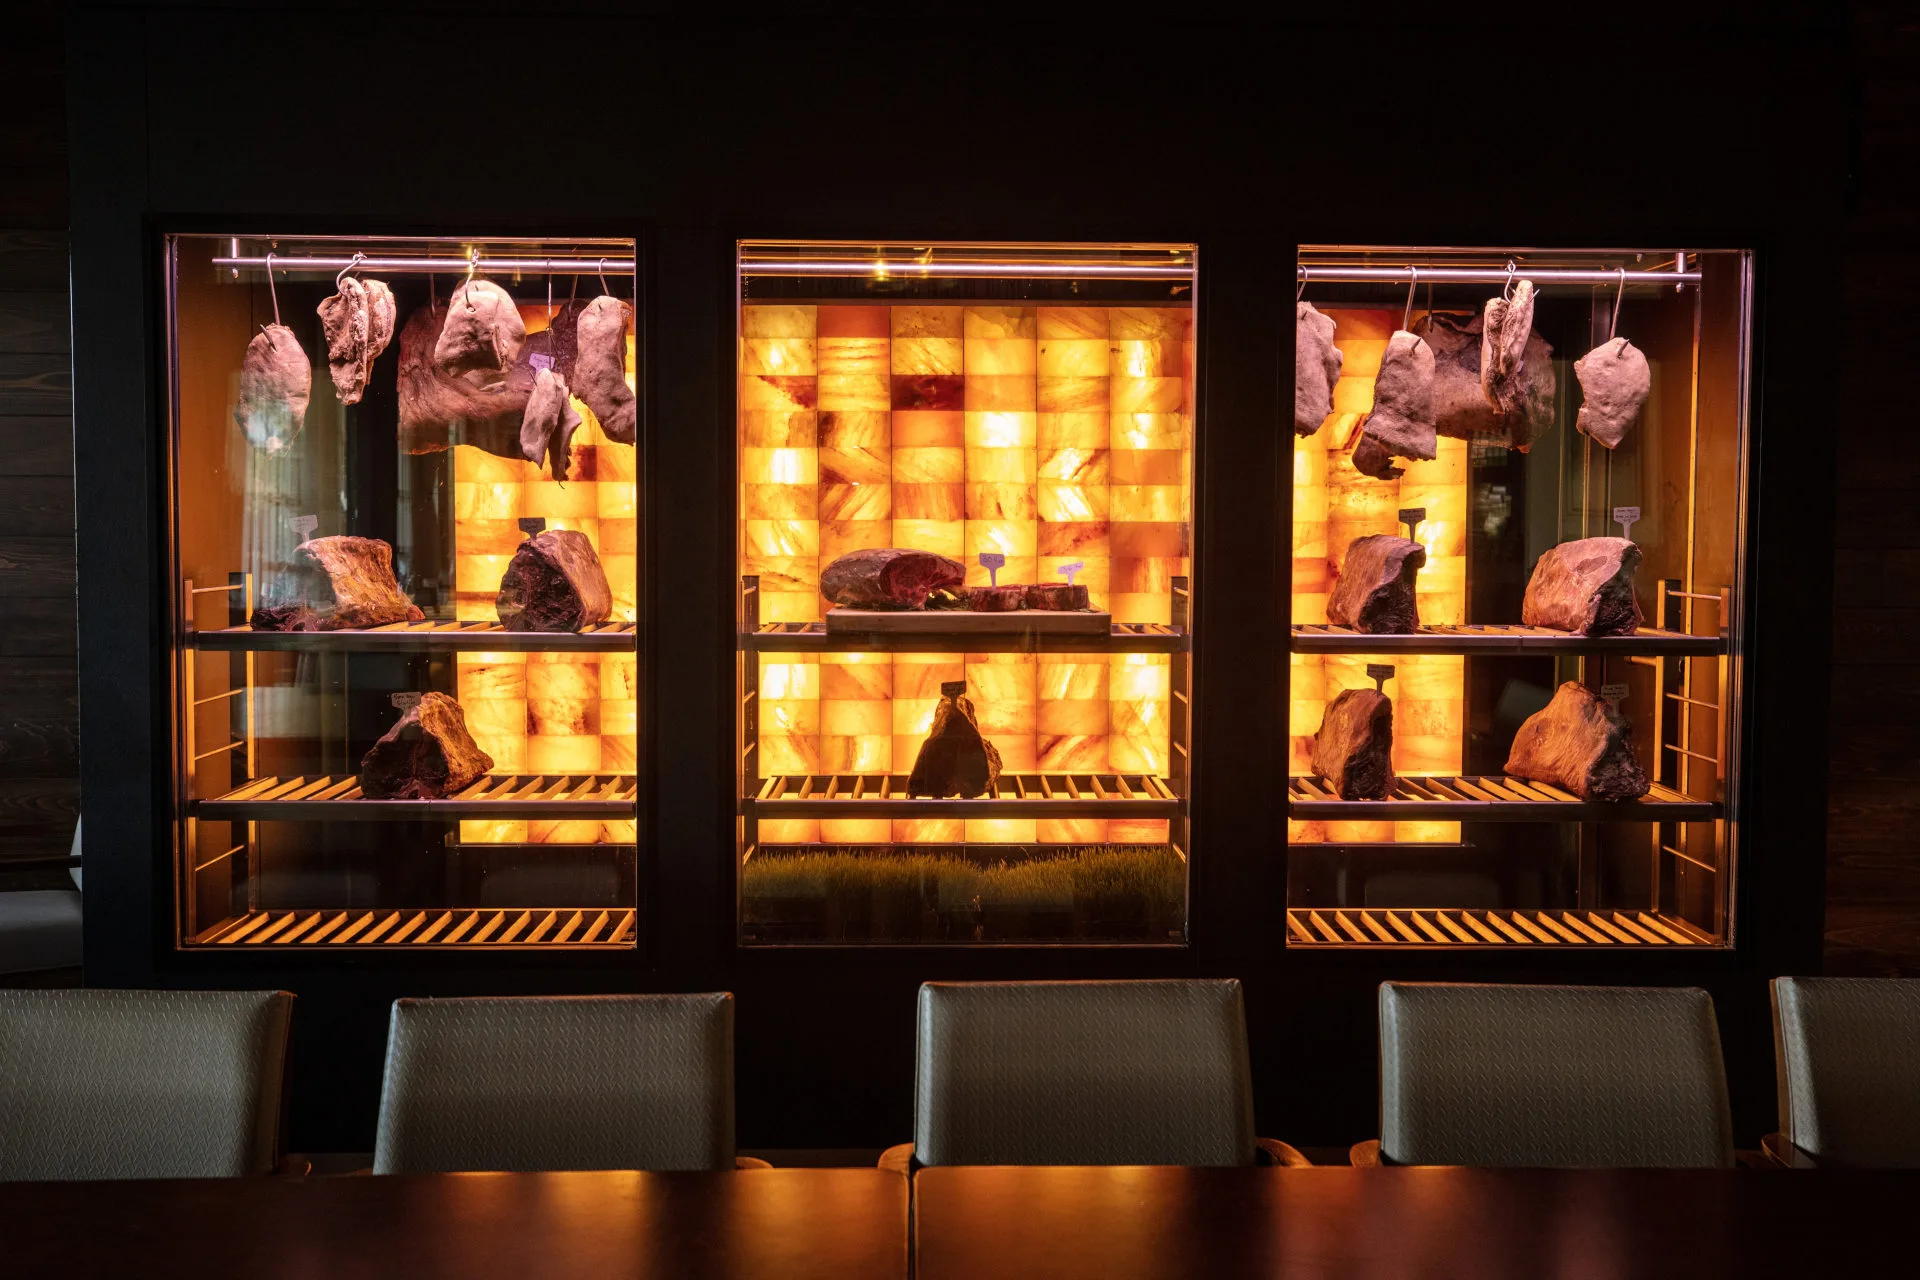 The Aging Room. Premium Meat Dry-Aging Walk-in Chamber in Black. Installation is in 27 WEST Italian Steakhouse at The Club of Admirals Cove, Jupiter, FL, USA.